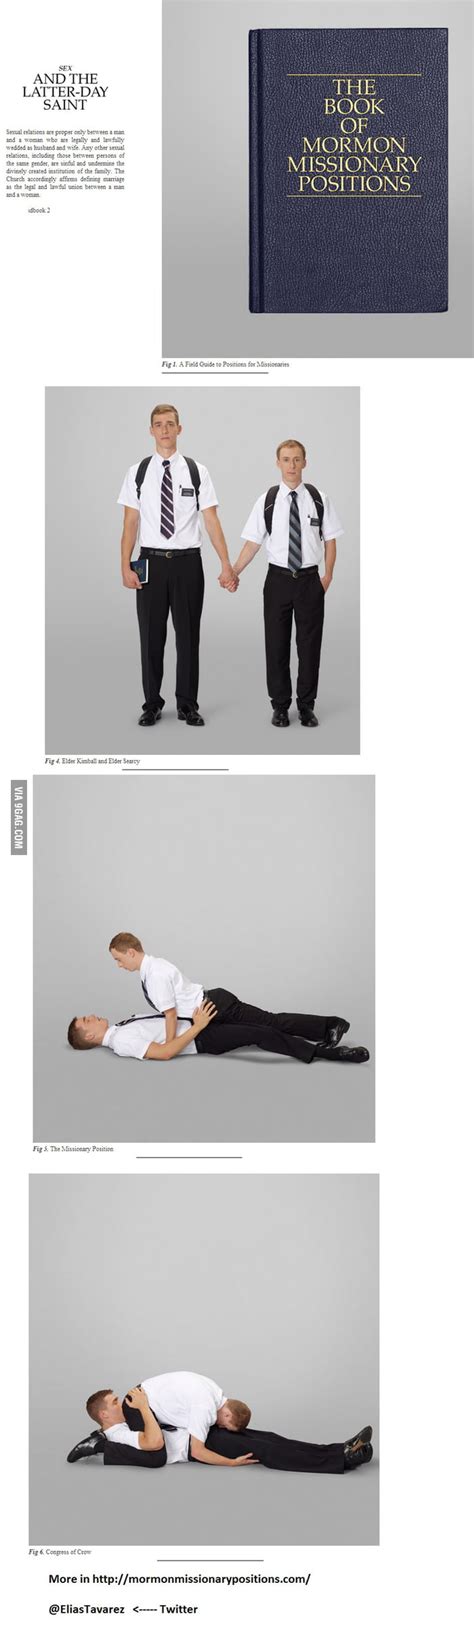 Mormon Missionary Positions 9gag